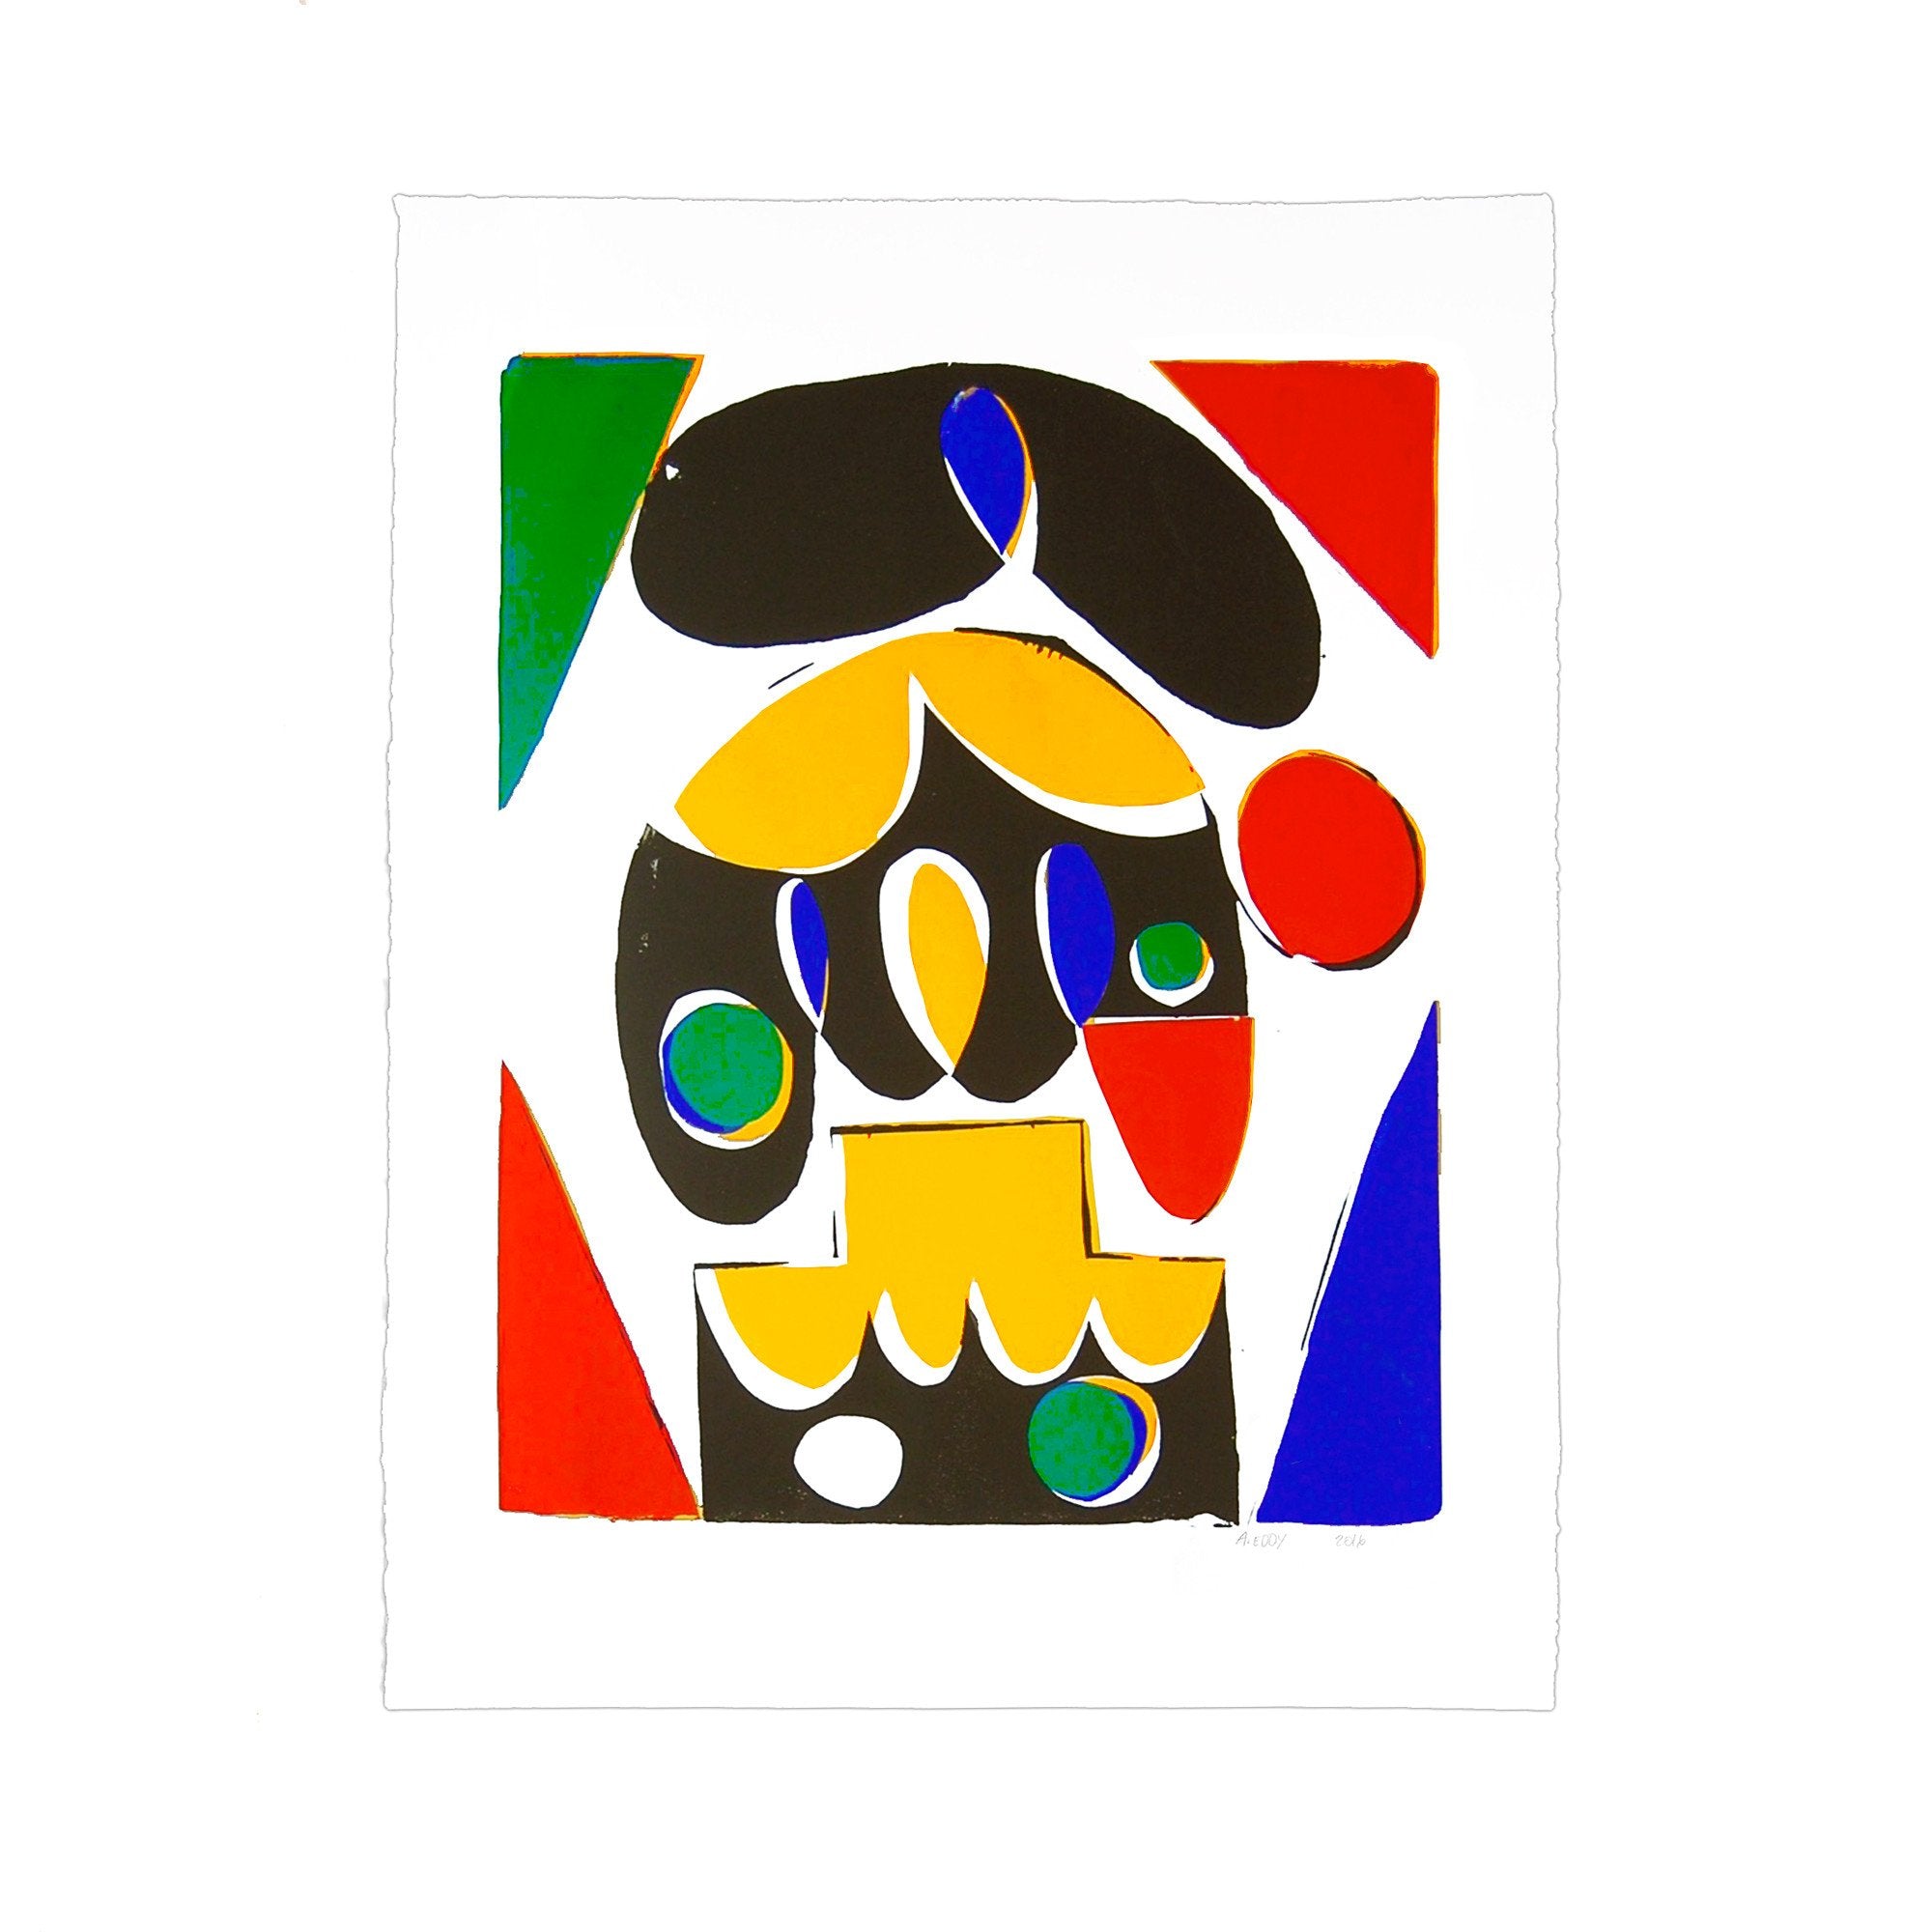 Flying-Fingers, City-Face (Yellow, Red, Blue, Green, Black)